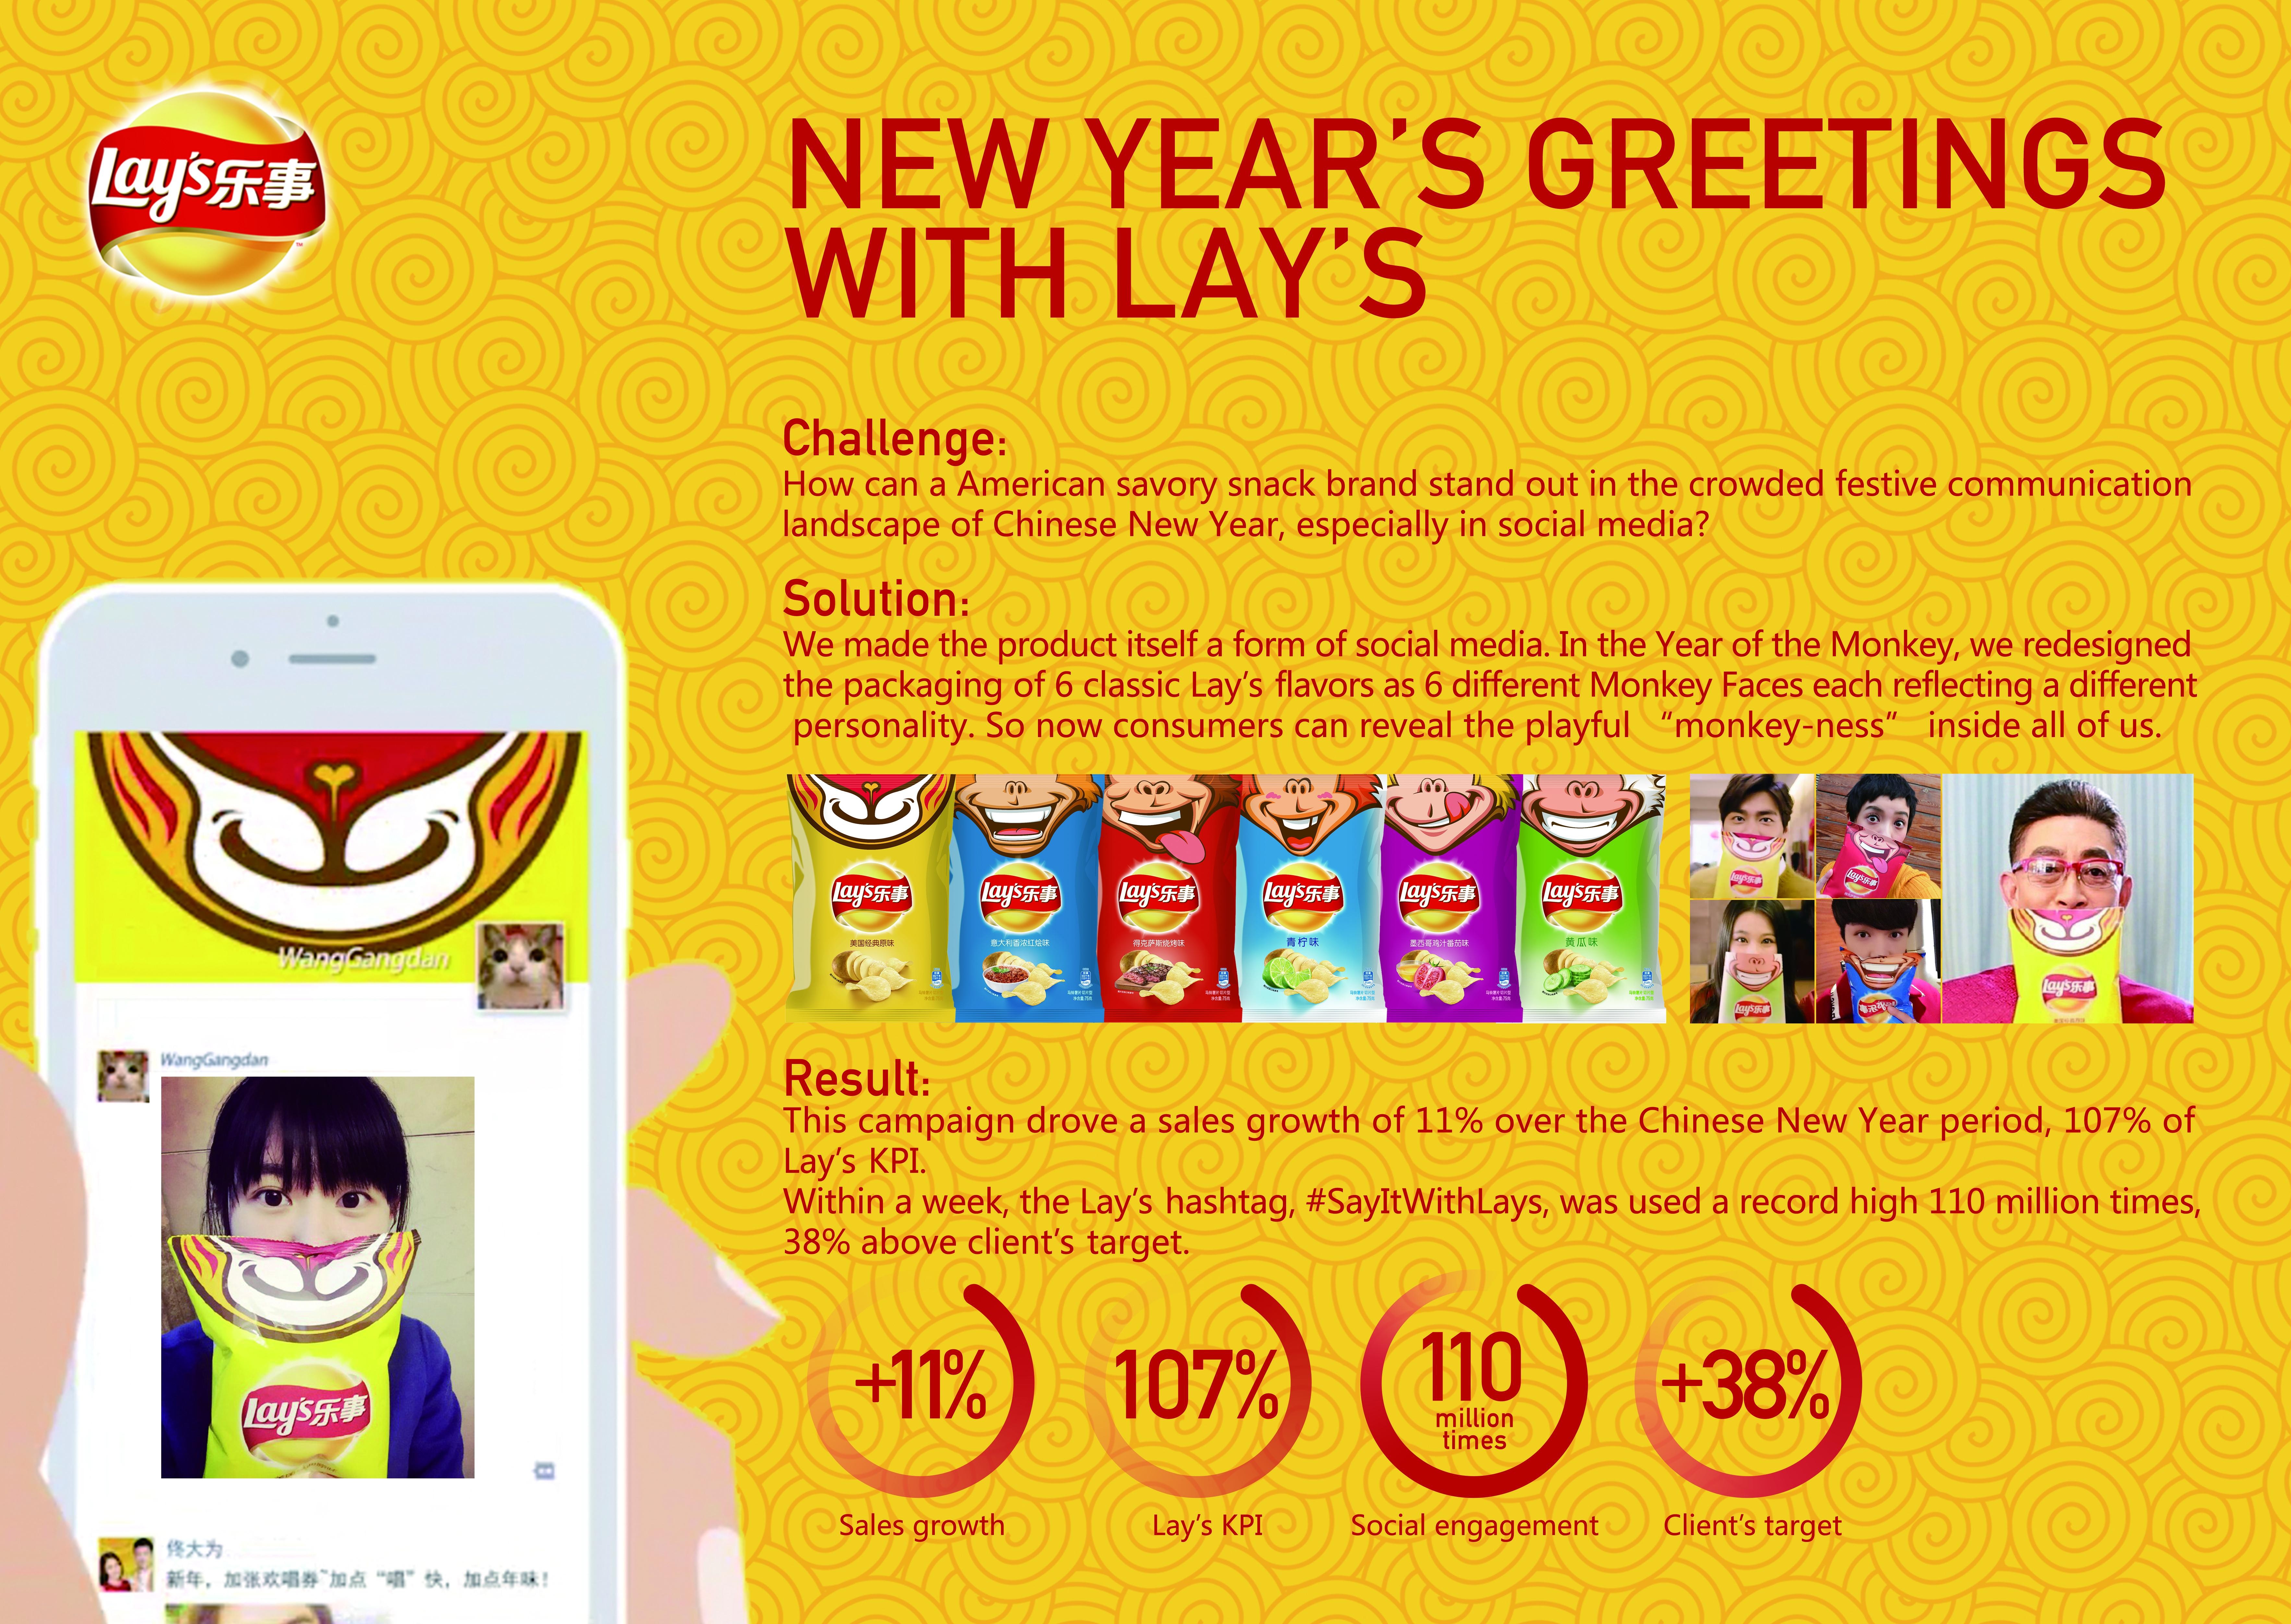 NEW YEAR'S GREETING WITH LAY'S